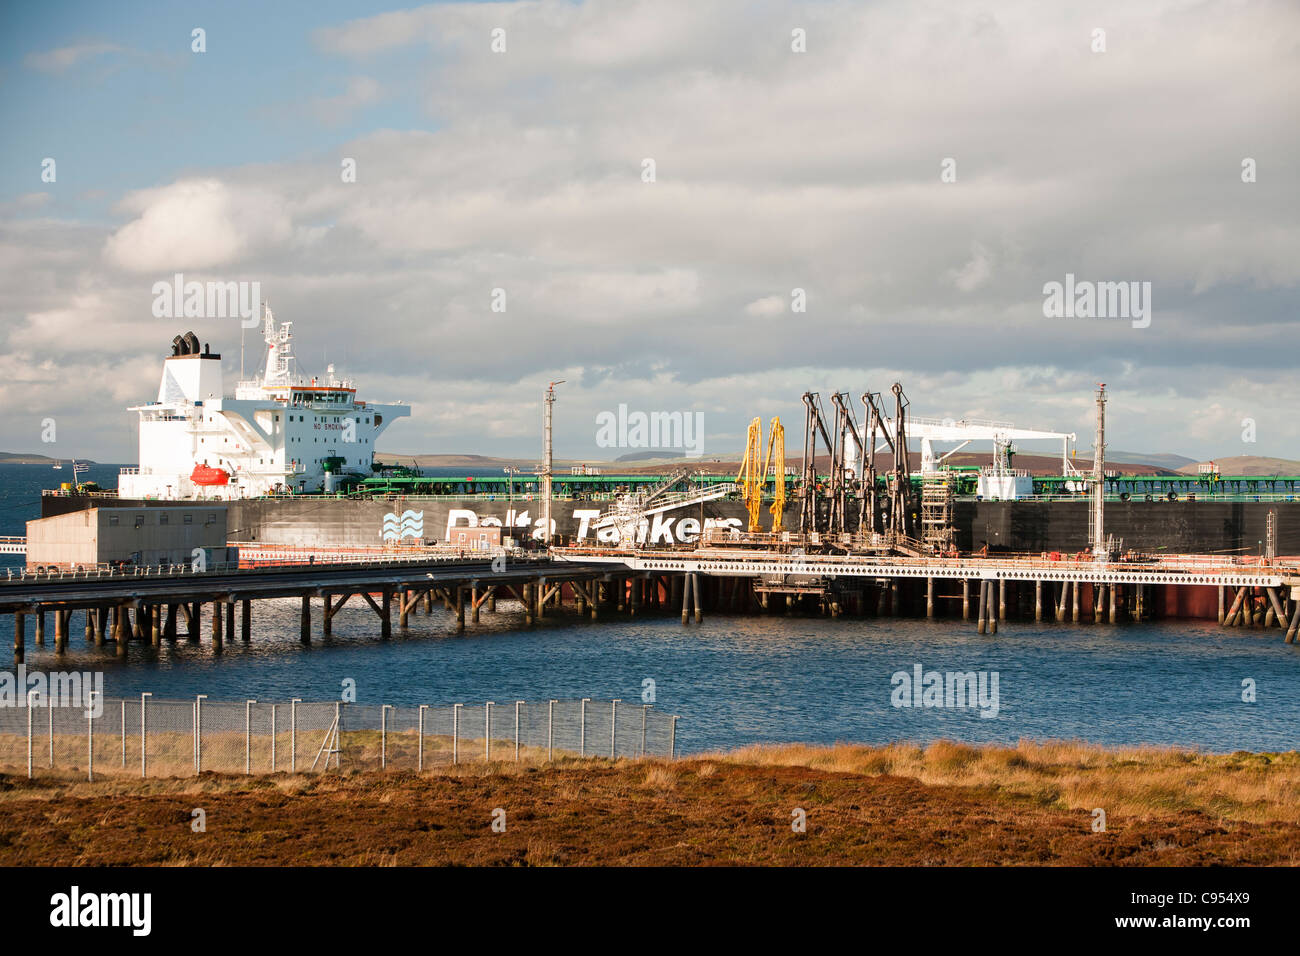 An oil tanker loading with crude oil at the Flotta oil terminal in the Orkney islands, Scotland, UK. Stock Photo